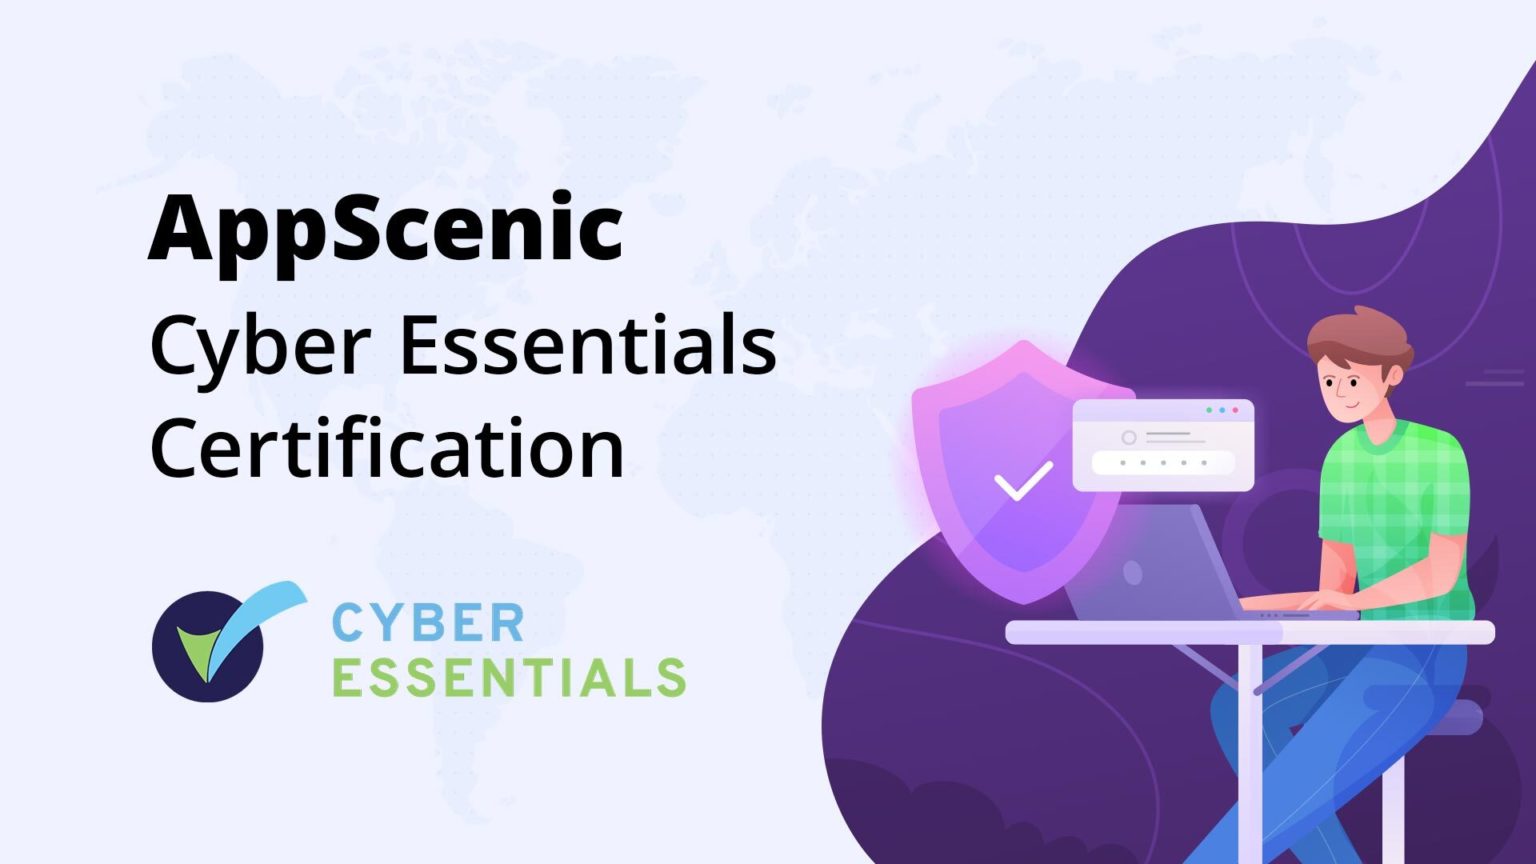 AppScenic is Cyber Essentials certified -  